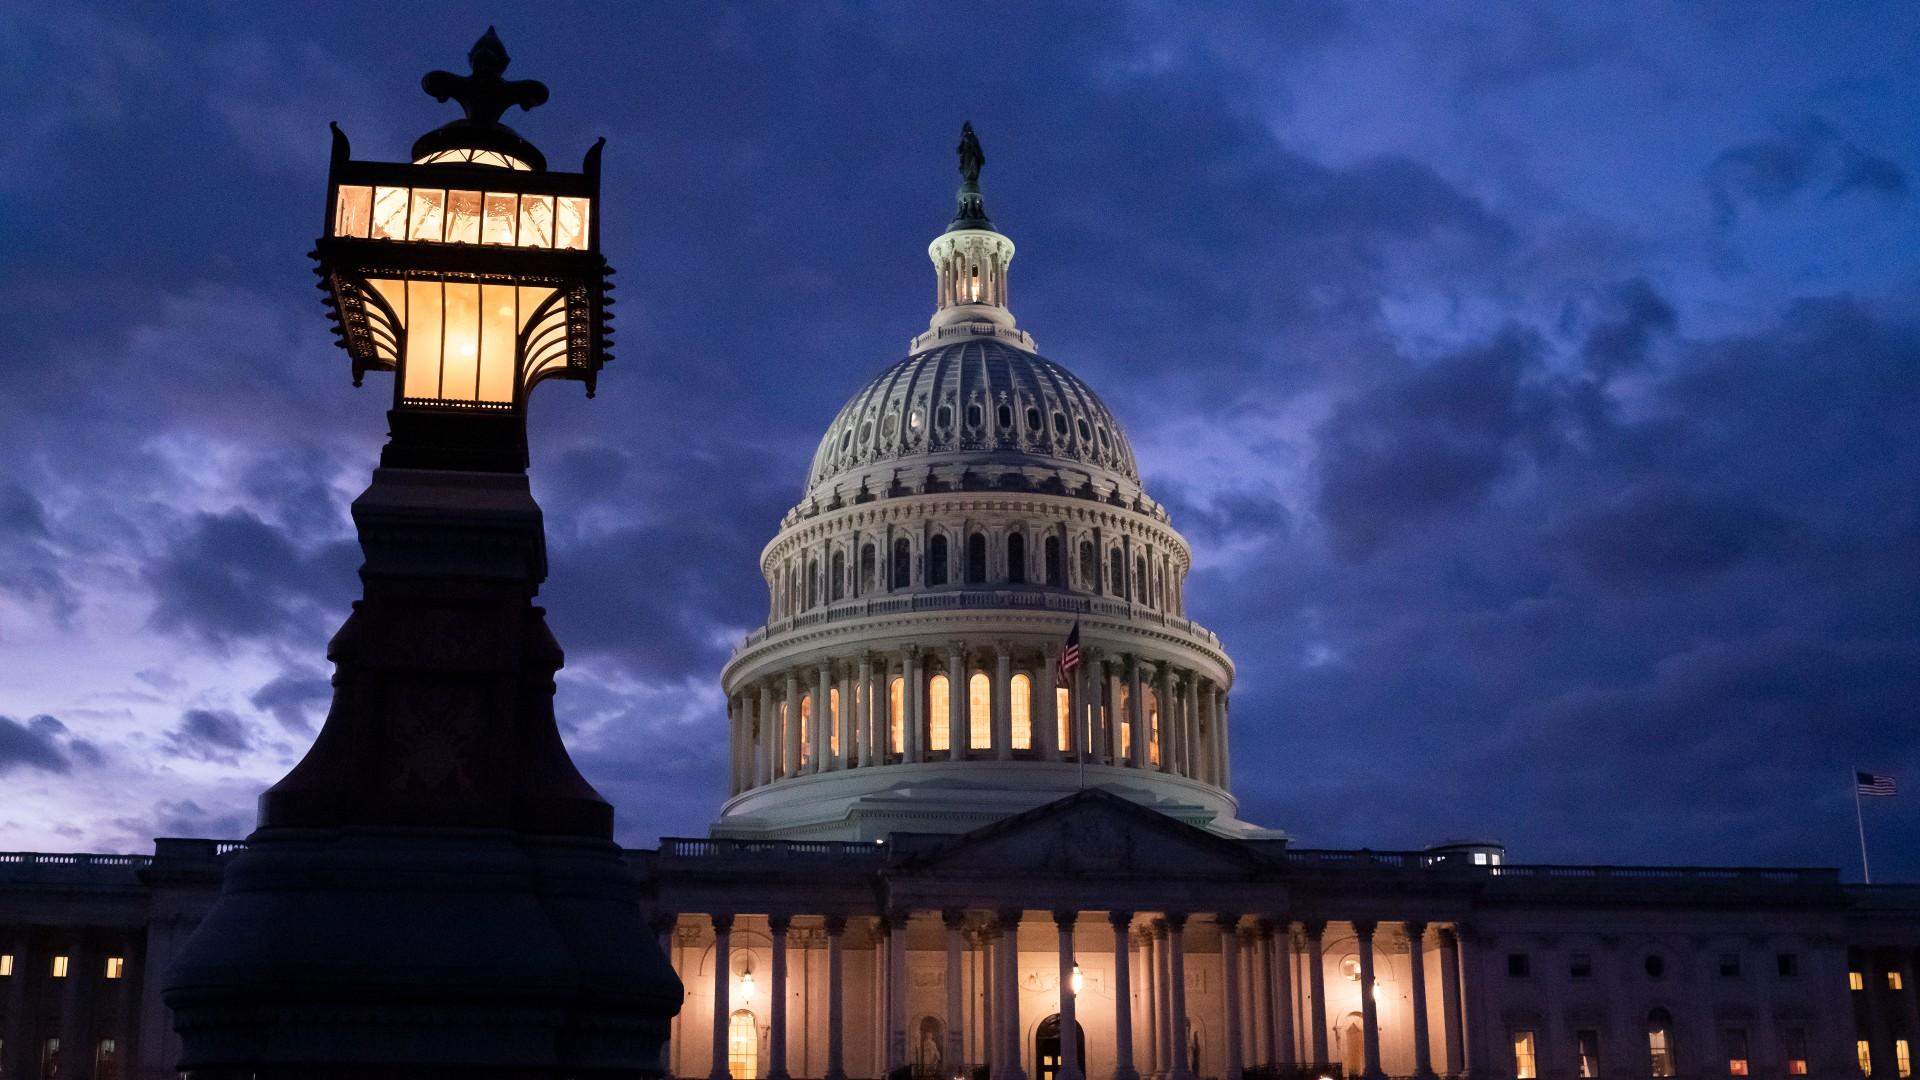 Night falls at the Capitol in Washington, Thursday, Dec. 2, 2021, with the deadline to fund the government approaching. (AP Photo / J. Scott Applewhite)